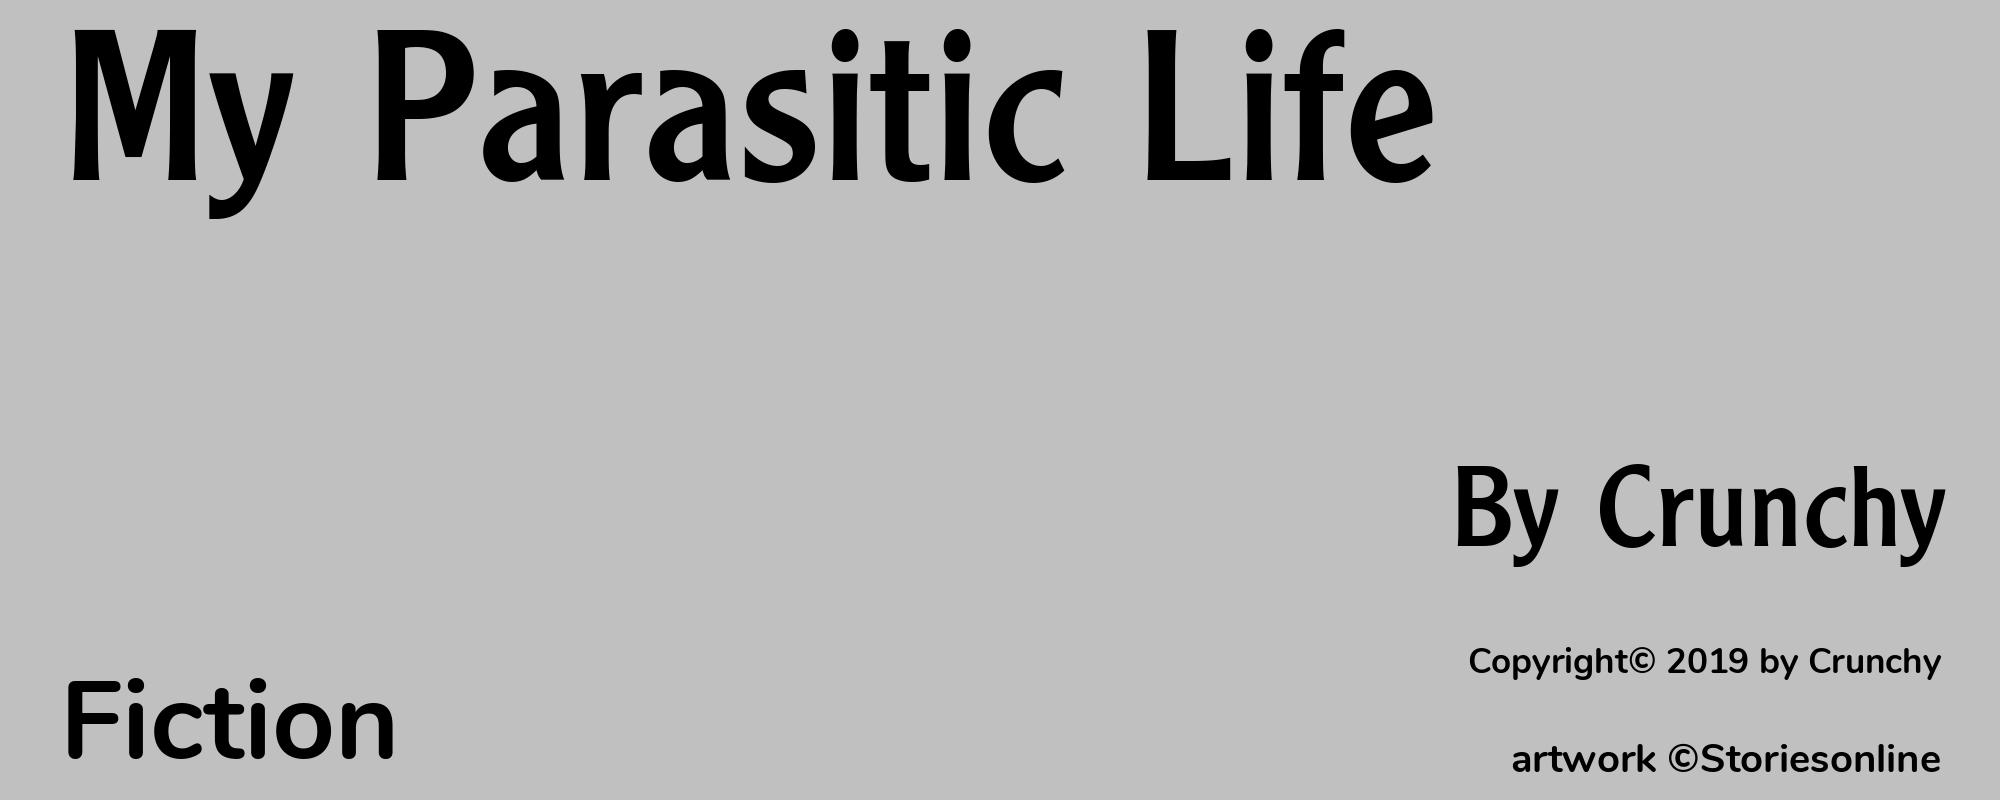 My Parasitic Life - Cover